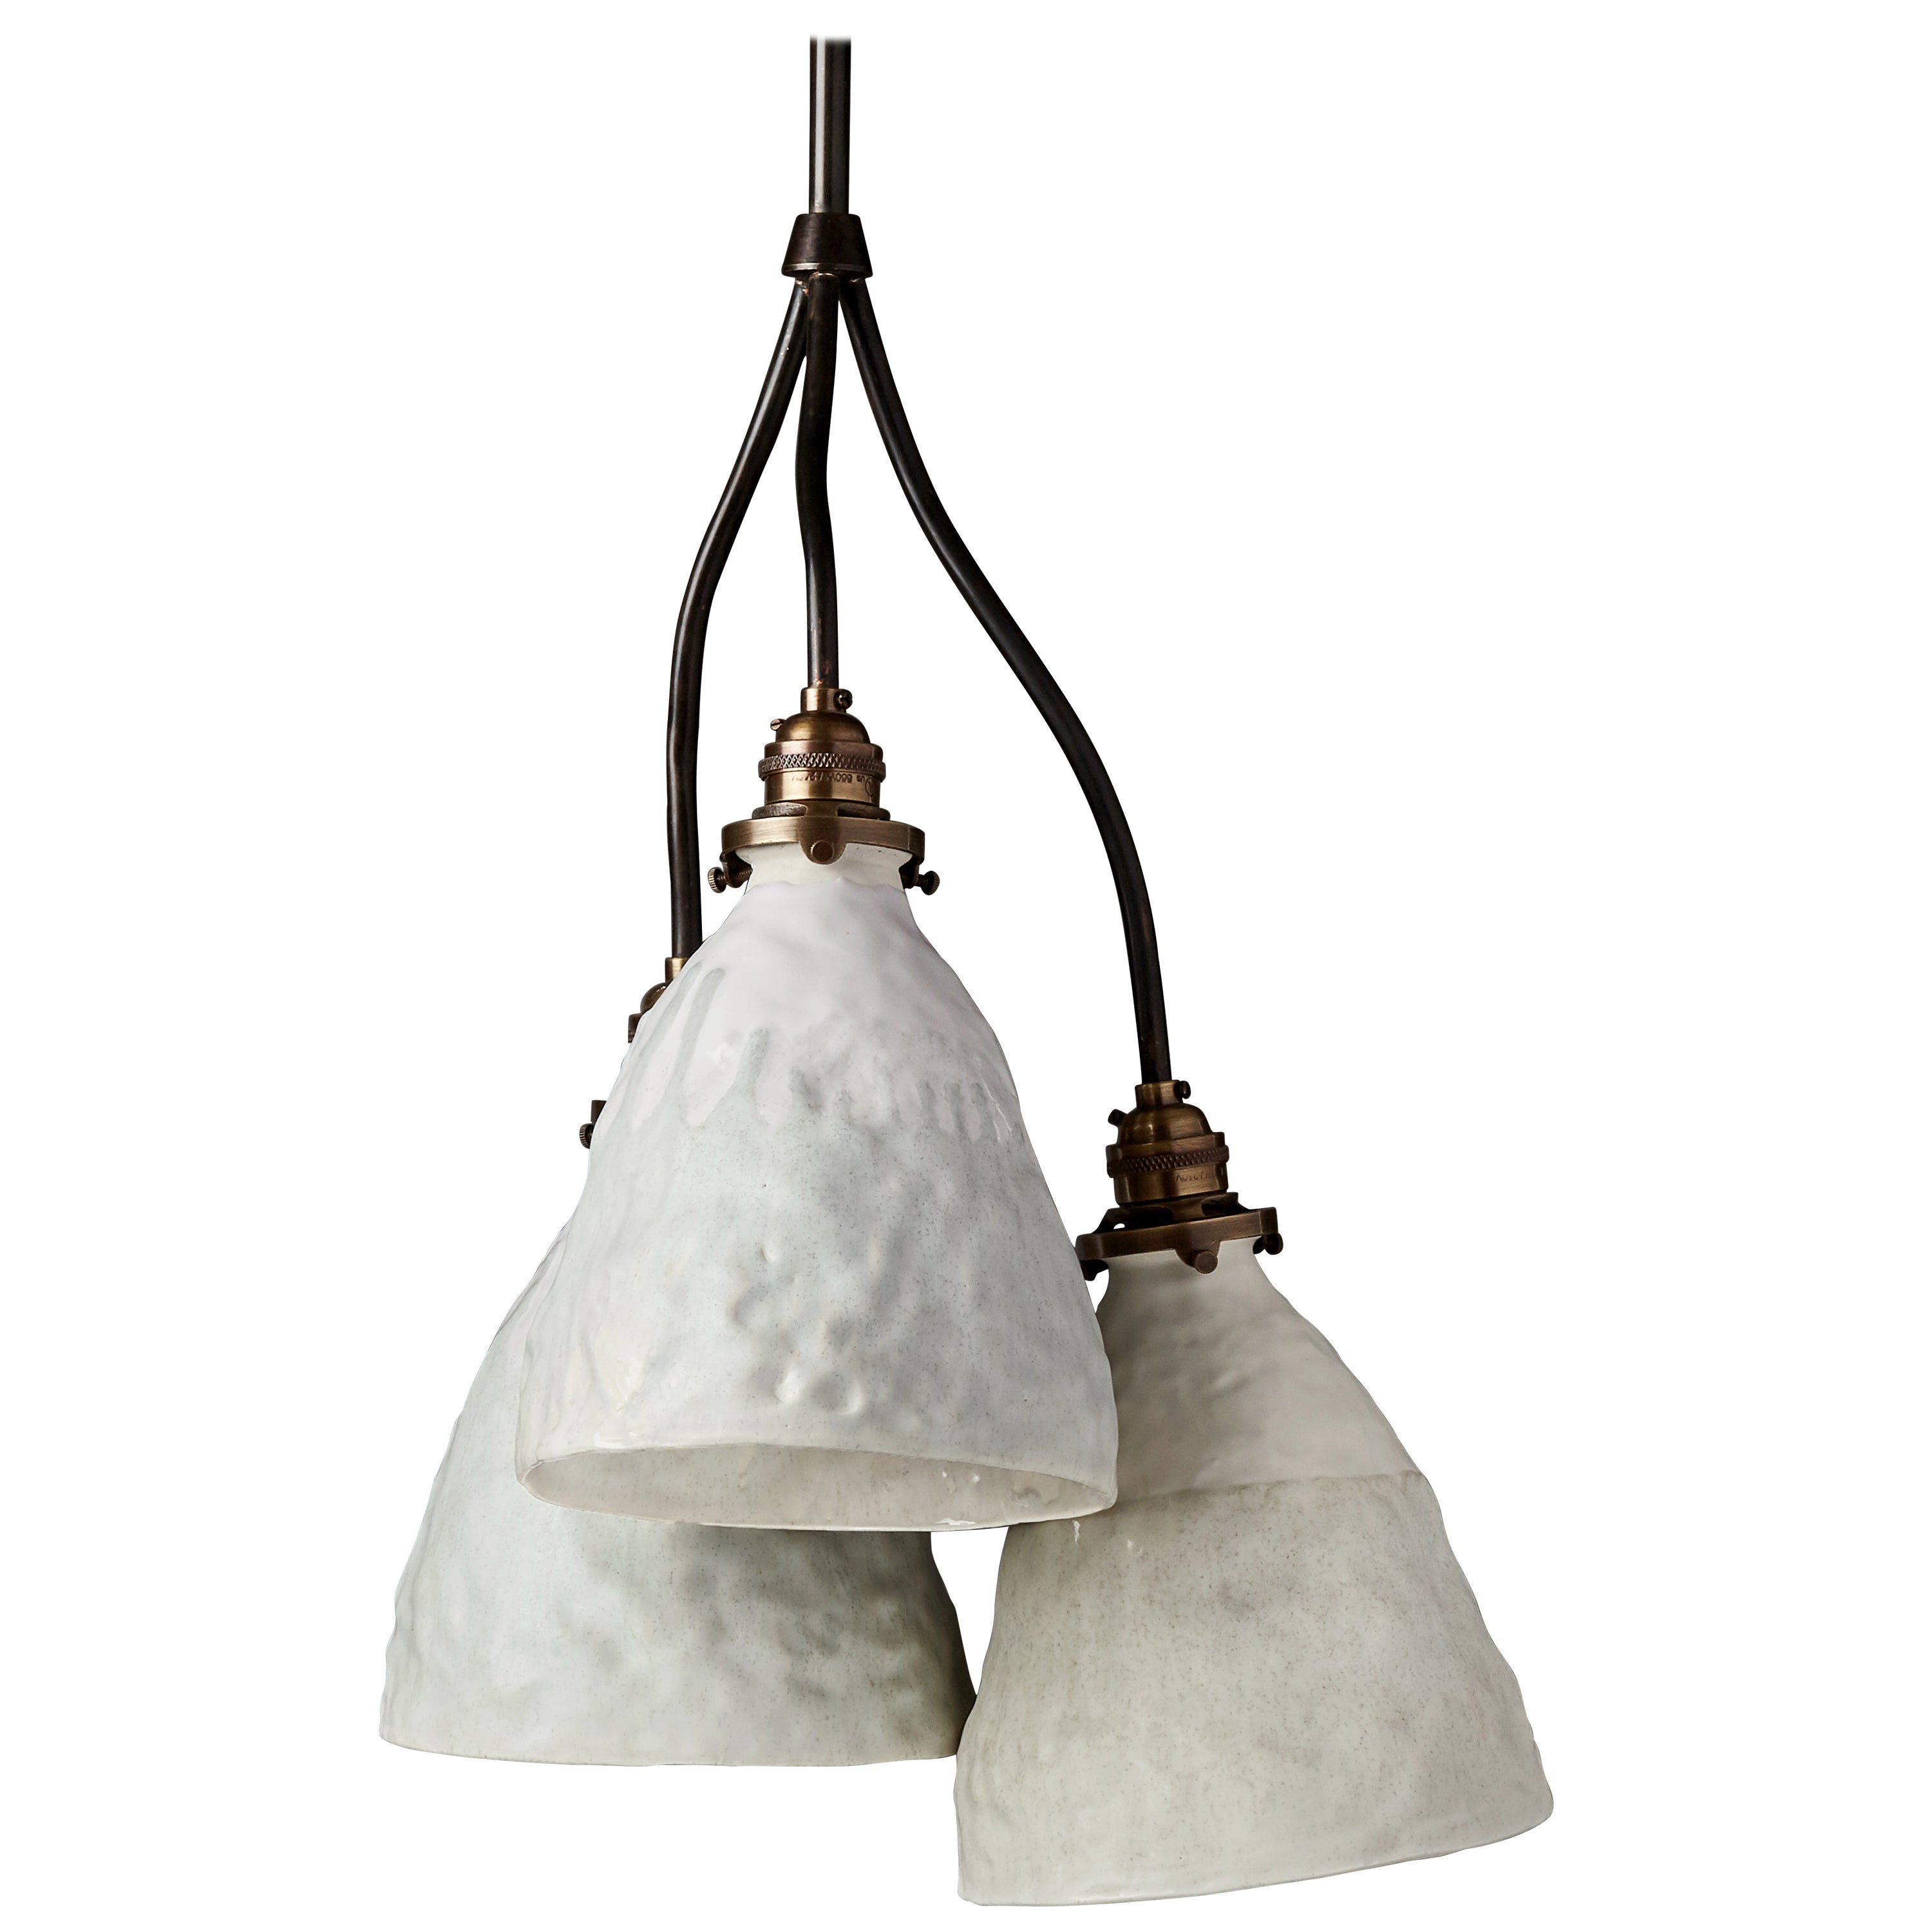 Handcrafted Organic Modern Textured Porcelain Three Shade Pendant For Sale